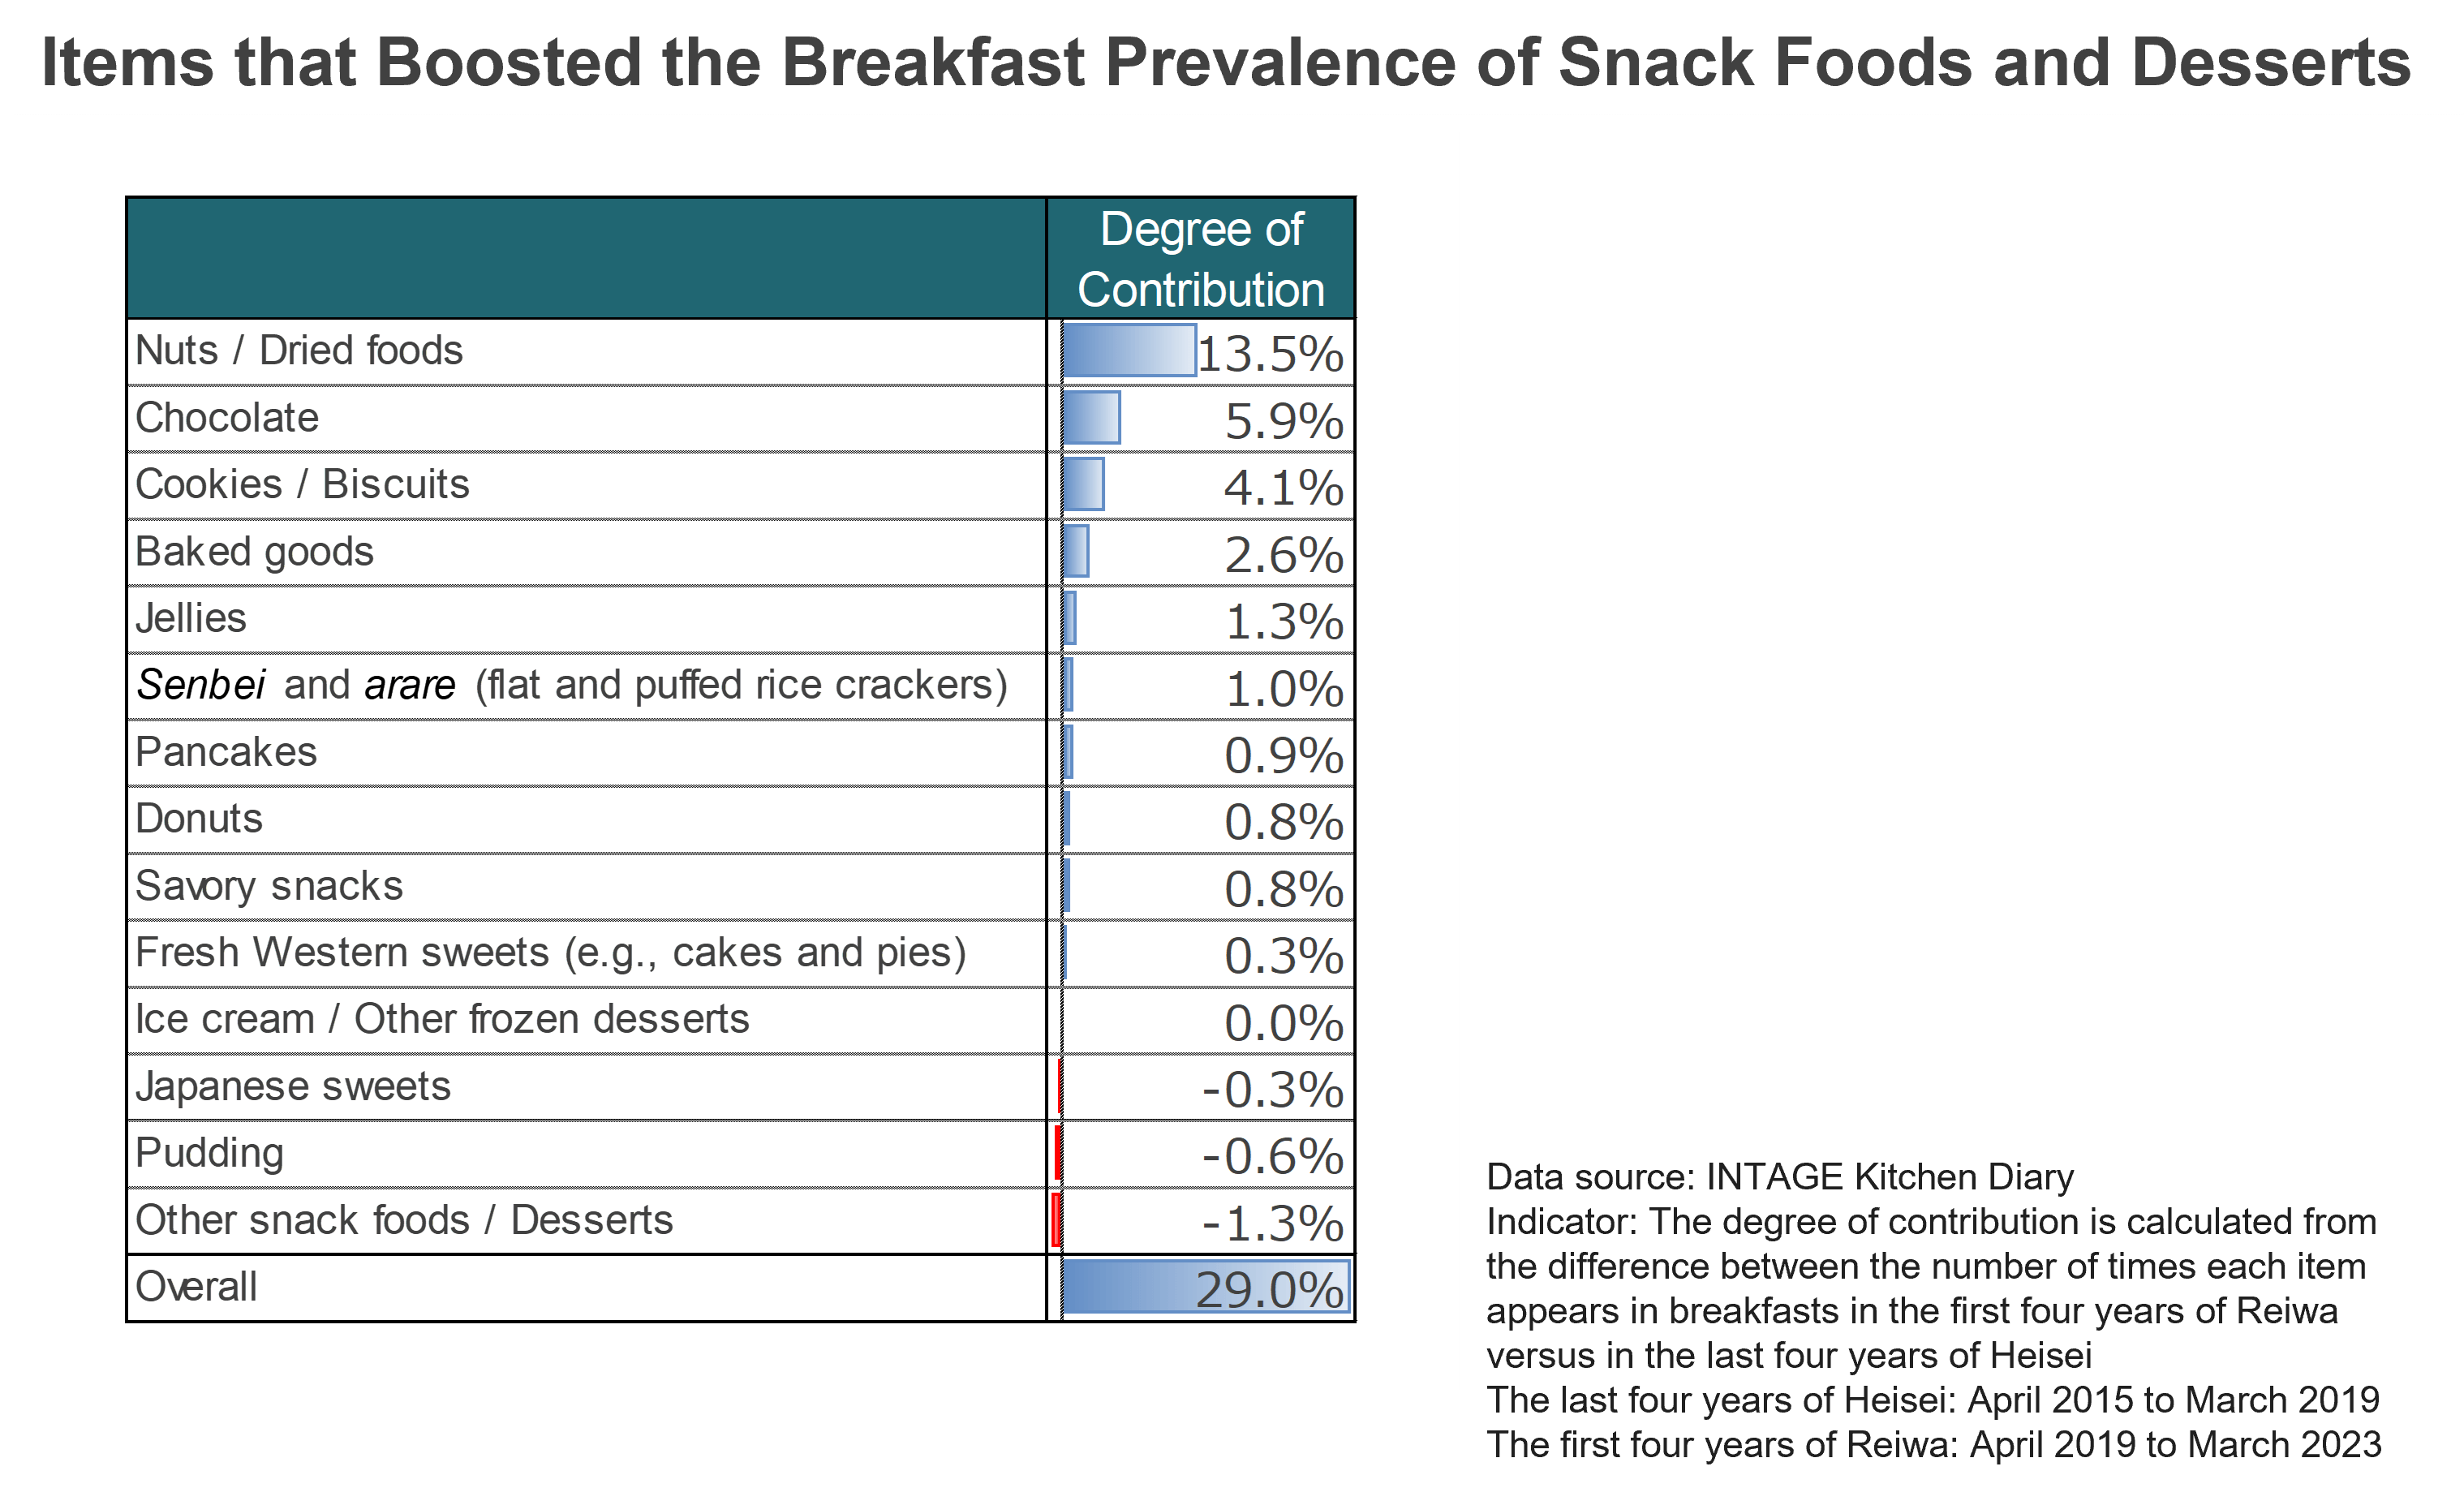 Items that Boosted the Breakfast Prevalence of Snack Foods and Desserts